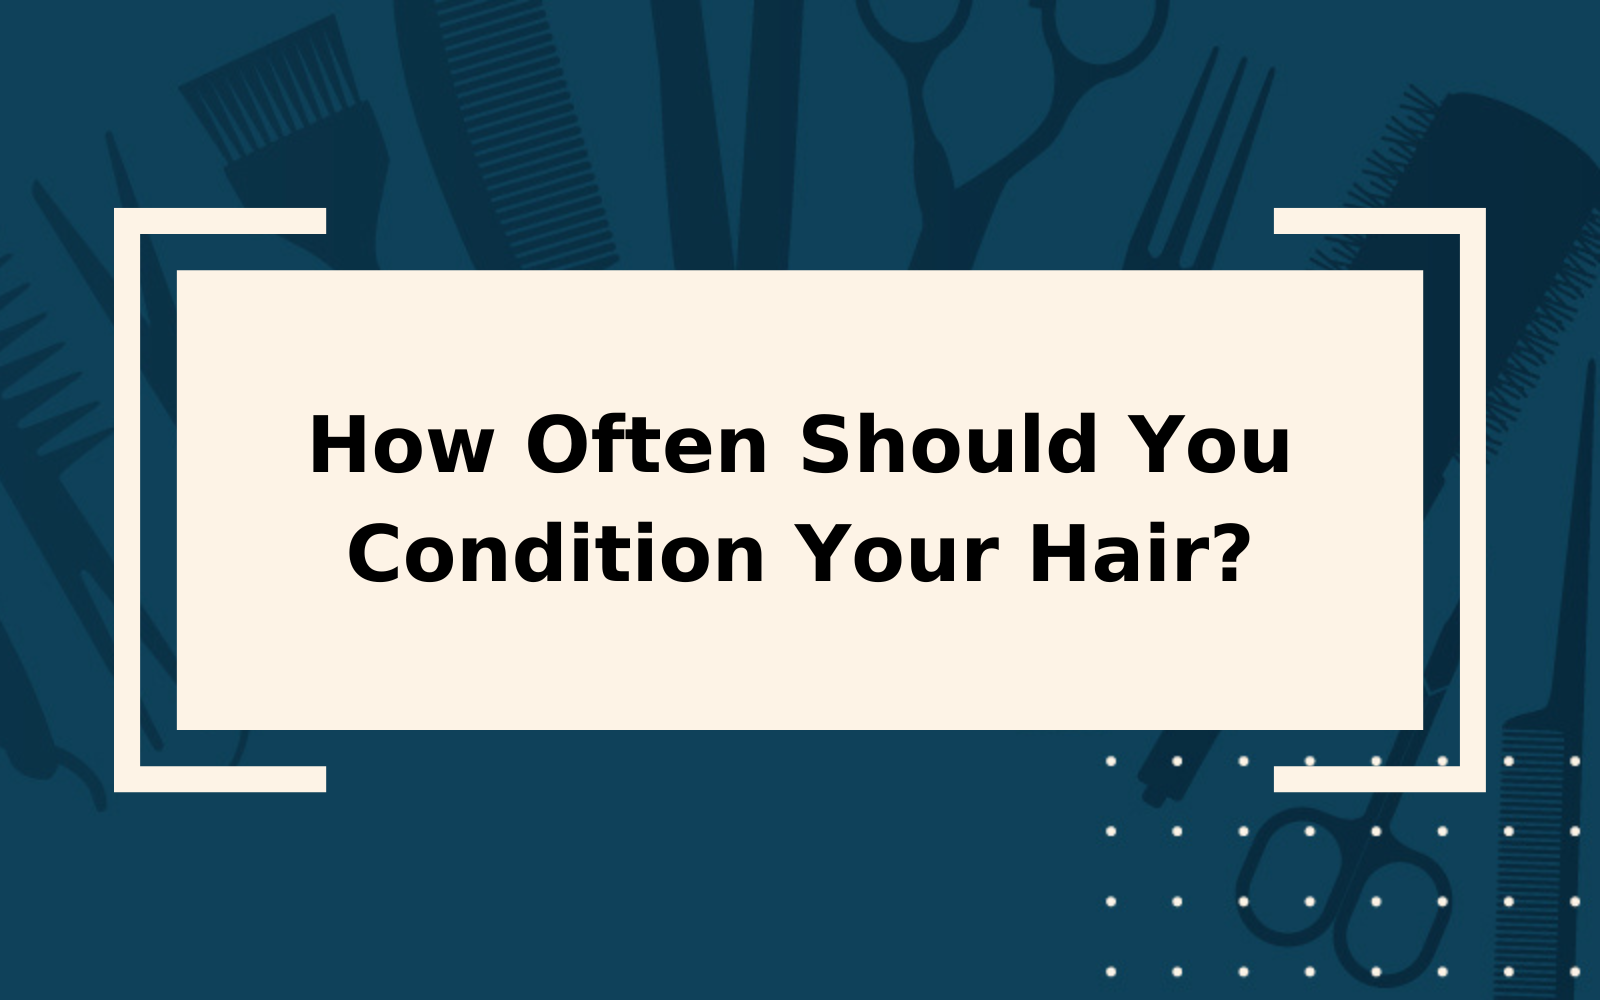 How Often Should You Condition Your Hair?